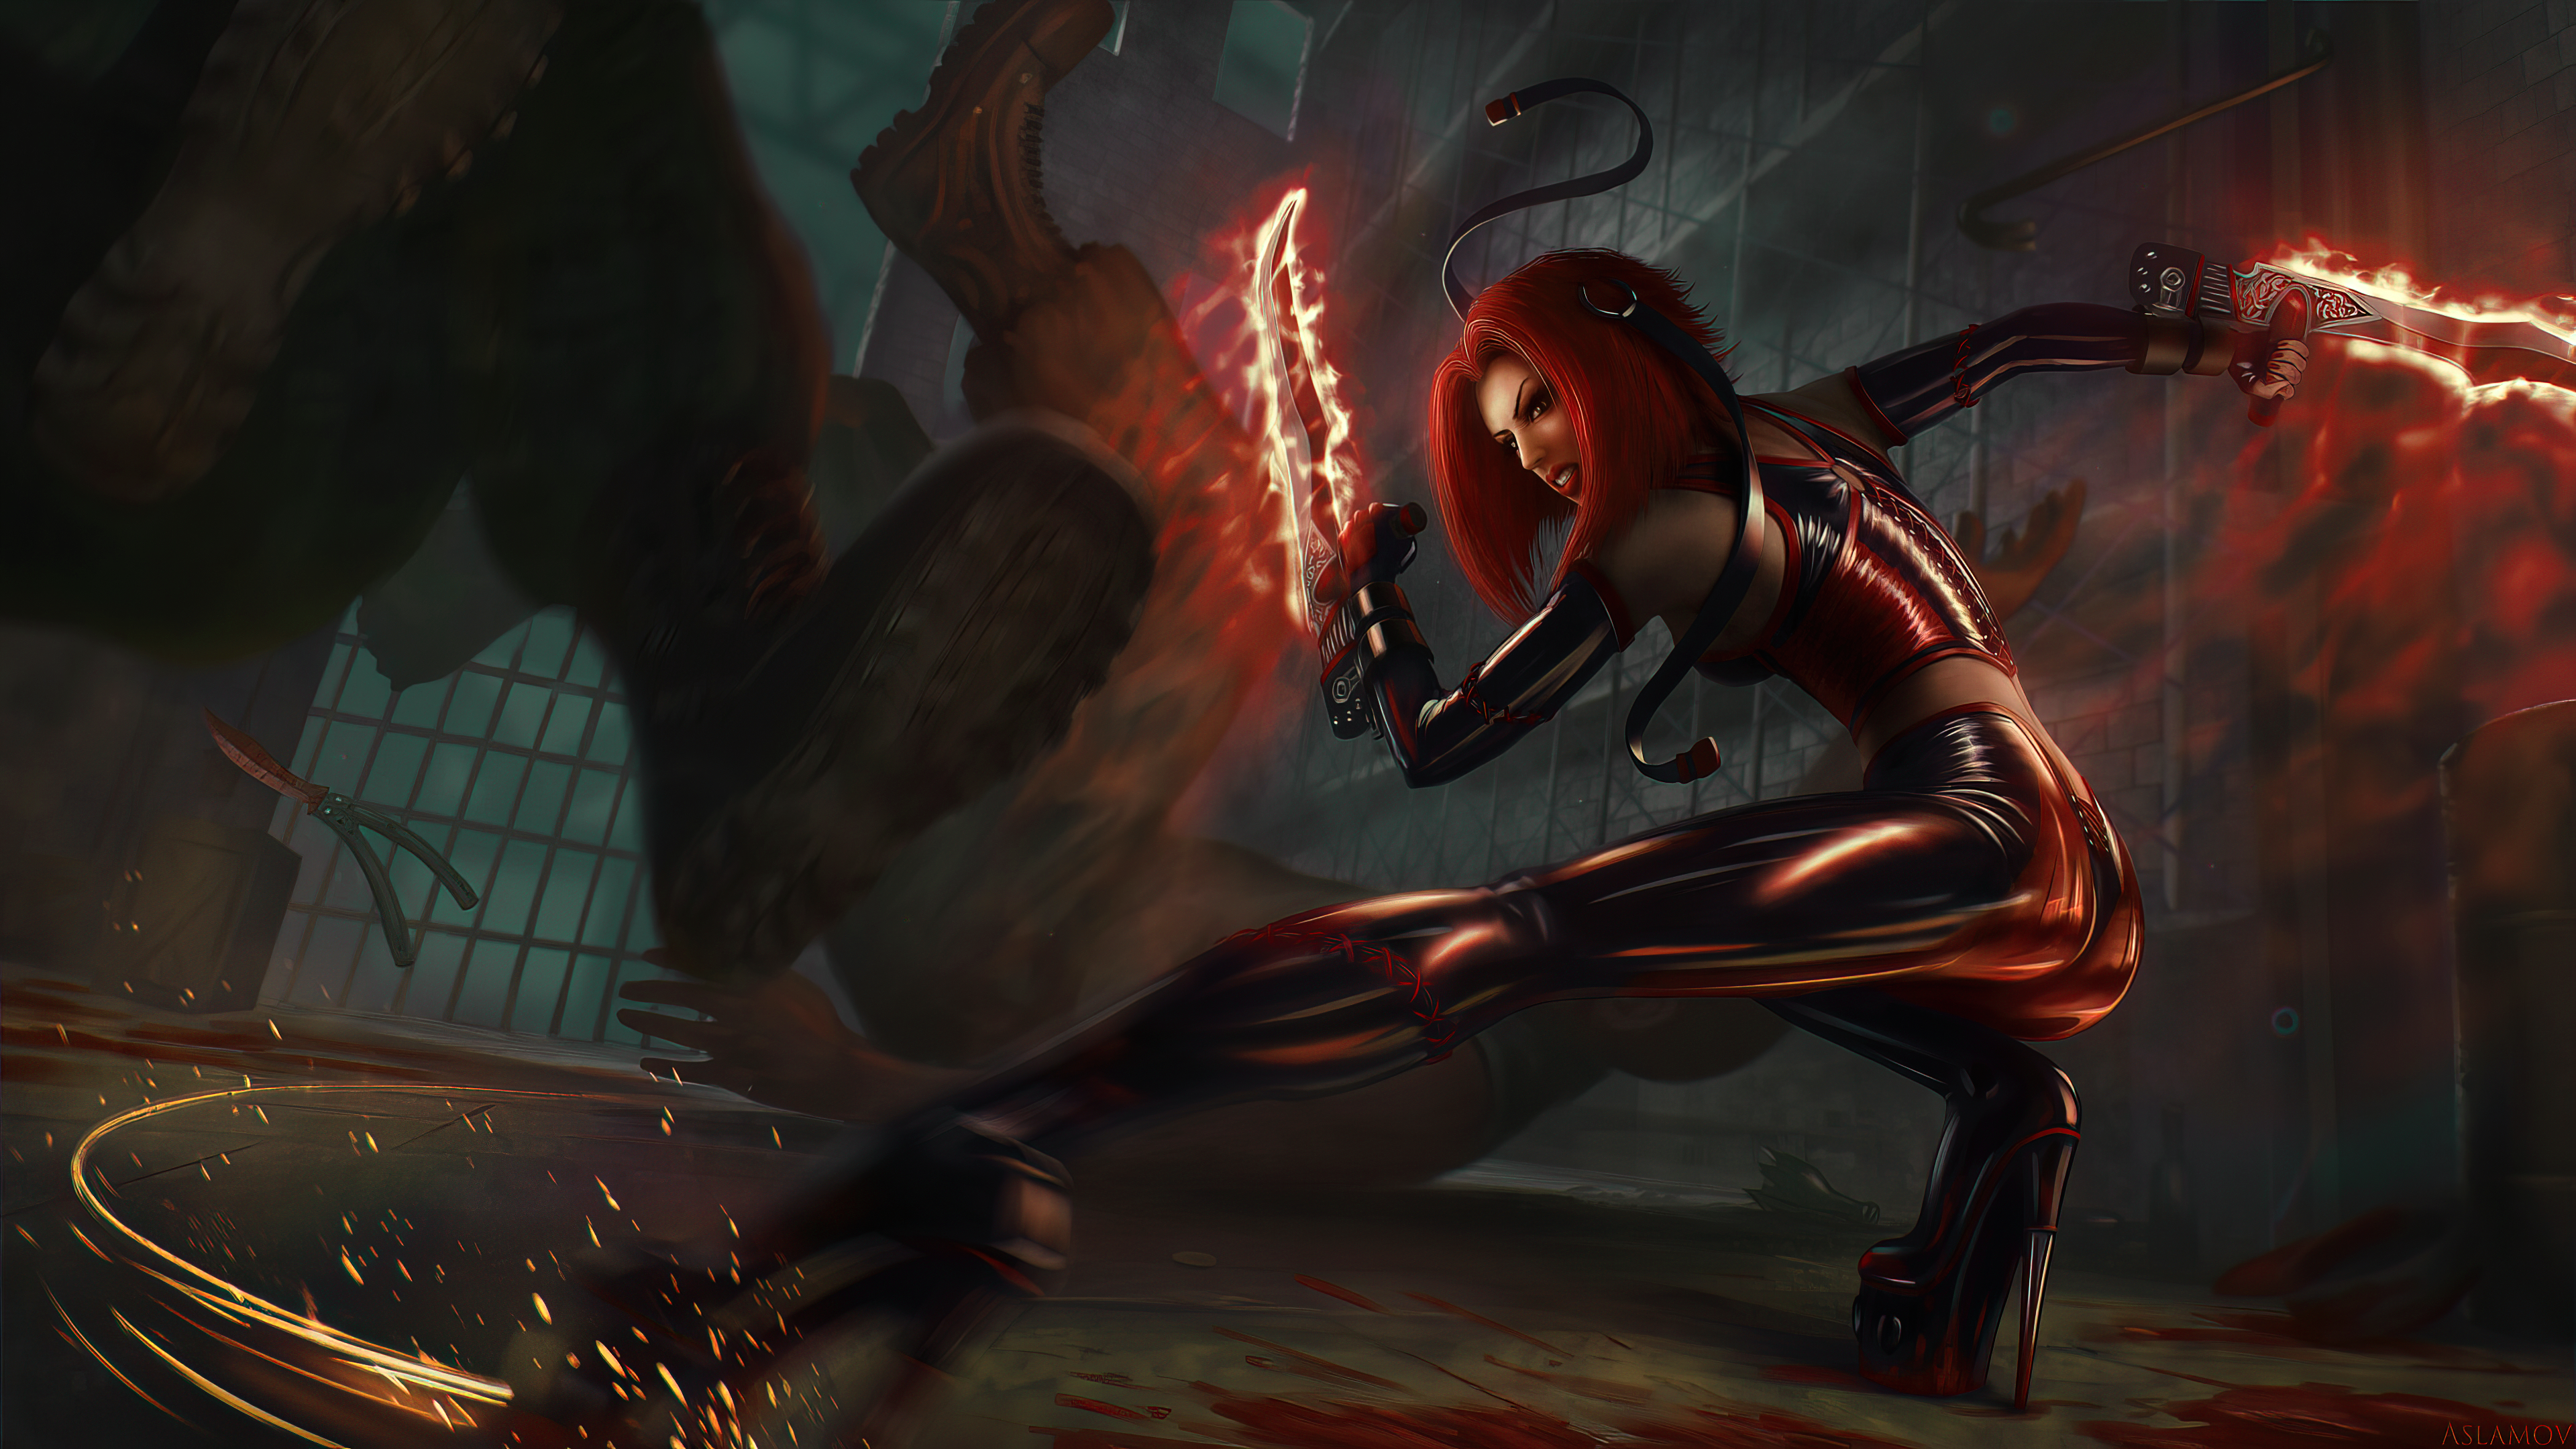 General 3840x2160 BloodRayne blades video game girls video game characters Damphir video games PC gaming redhead women with swords fan art